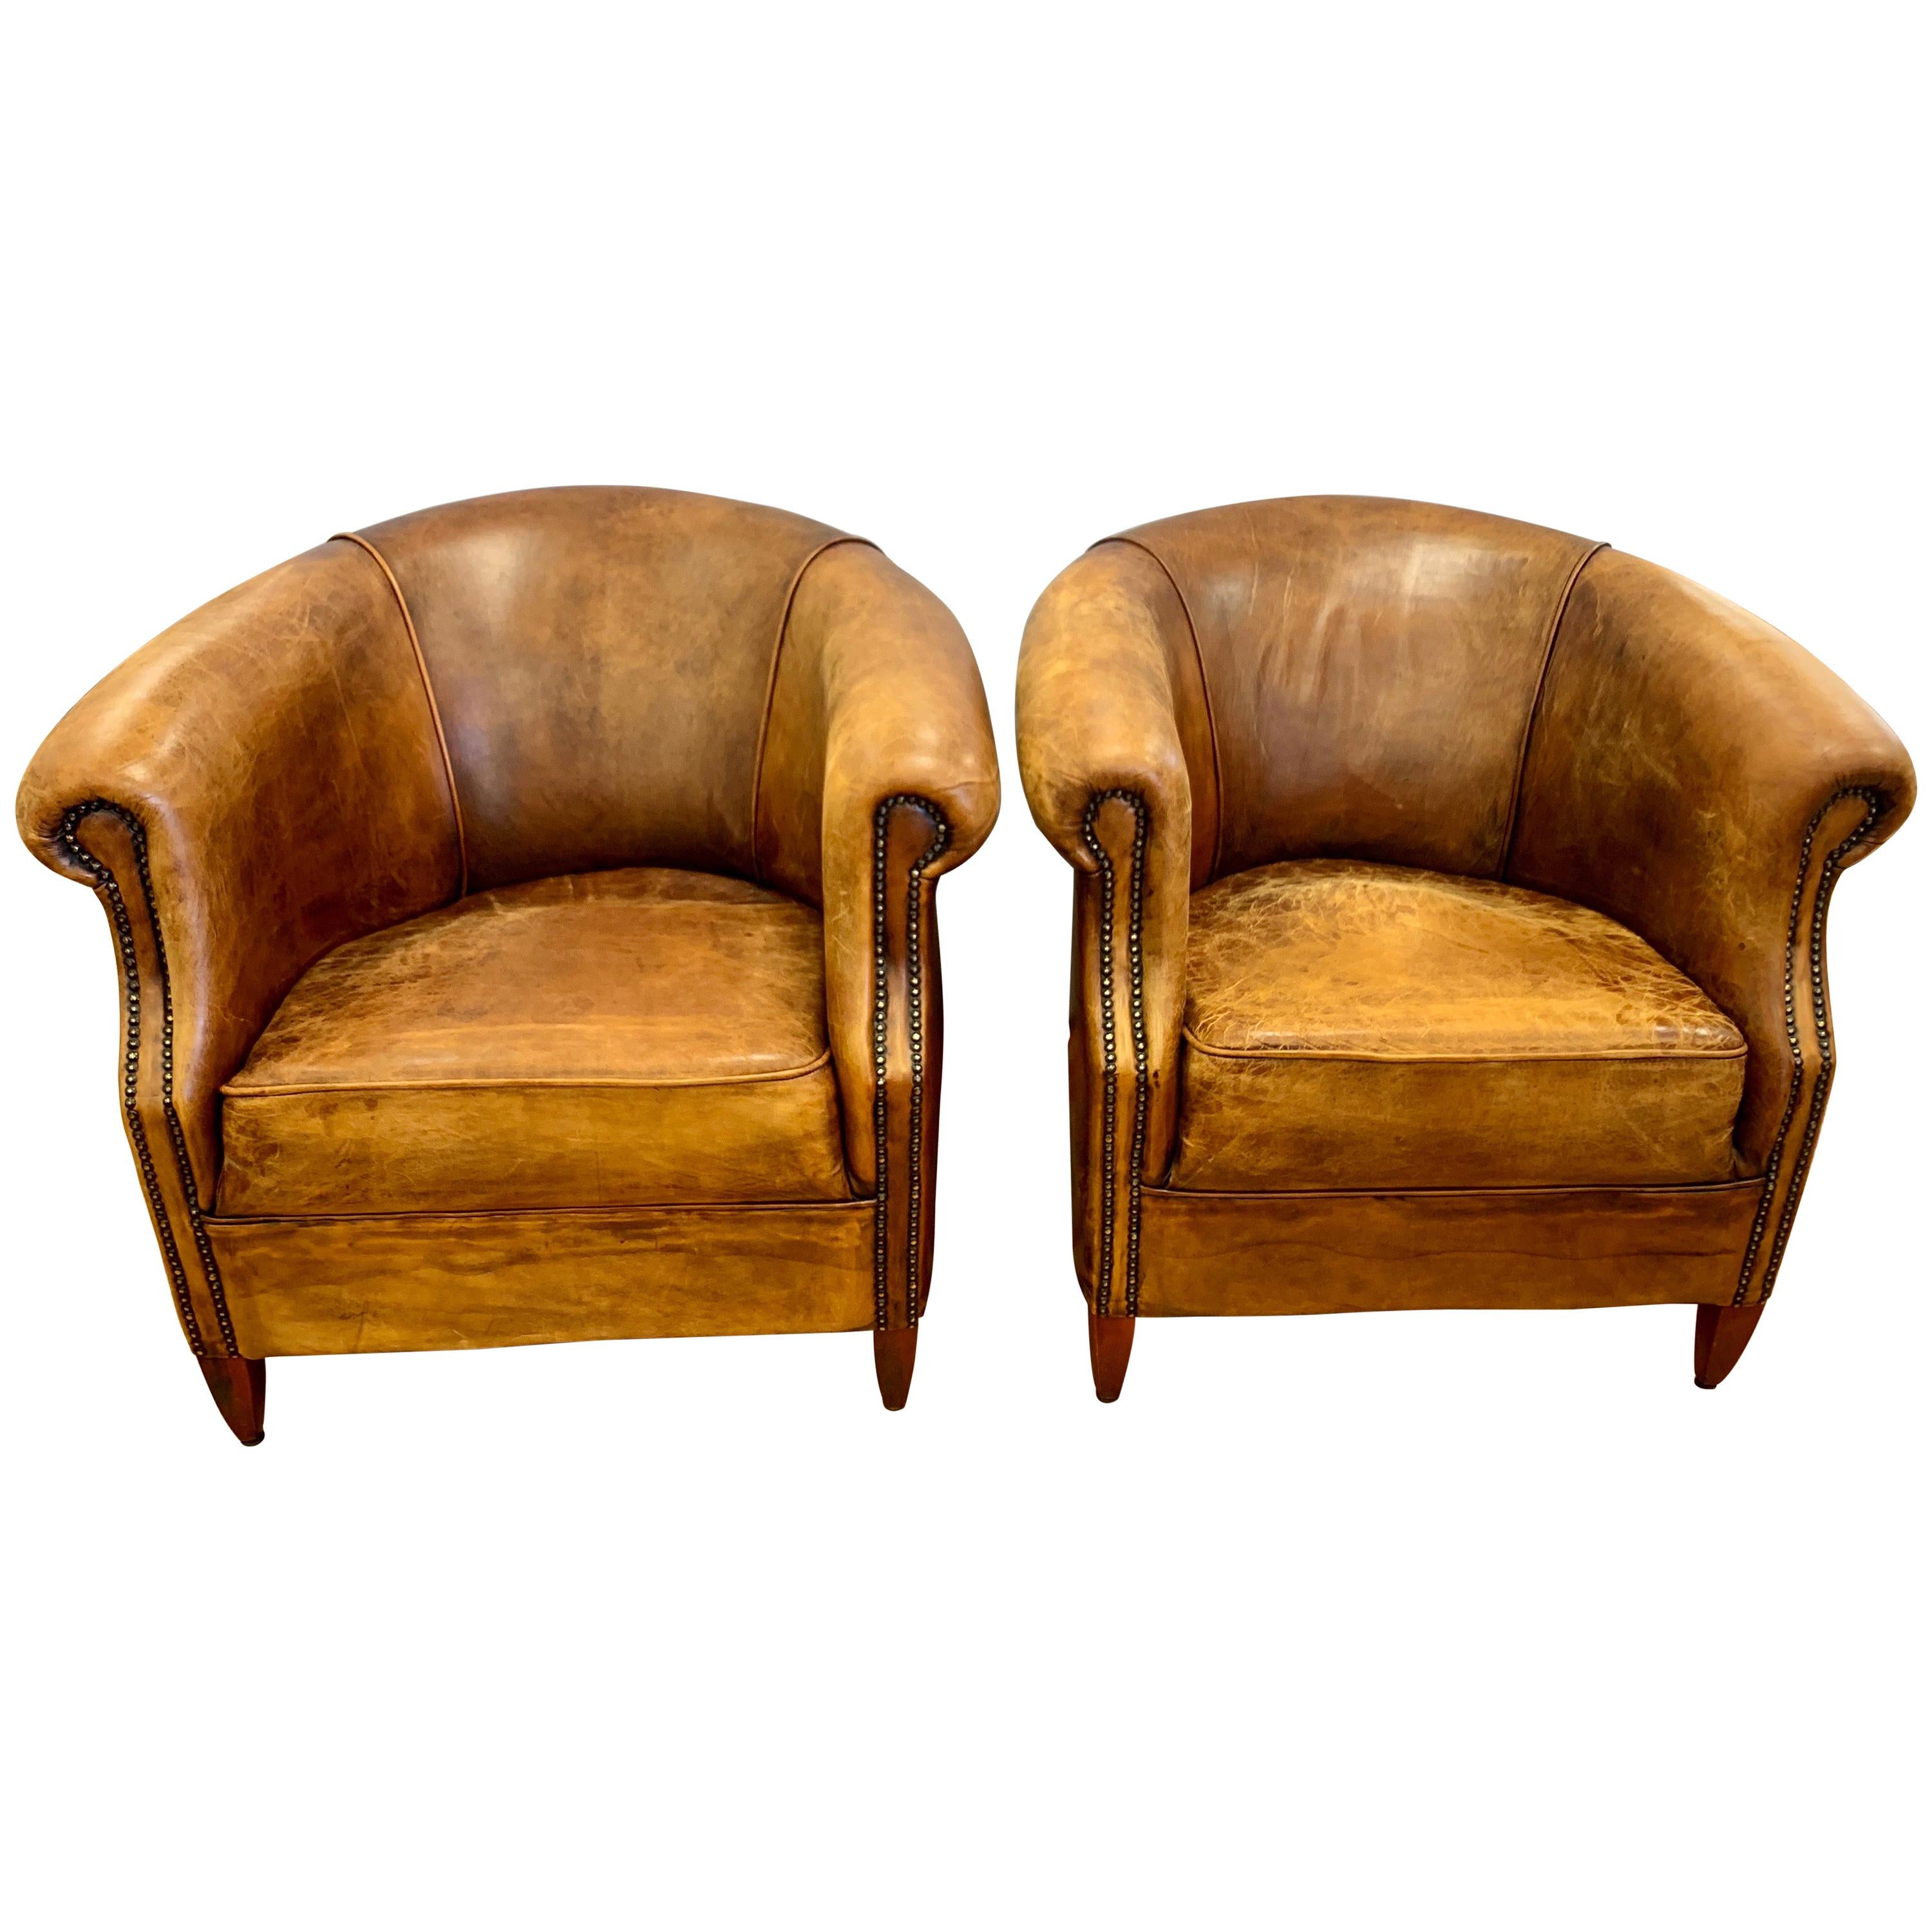 Pair of French Art Deco Distressed Leather & Nailhead Cigar Club Chairs